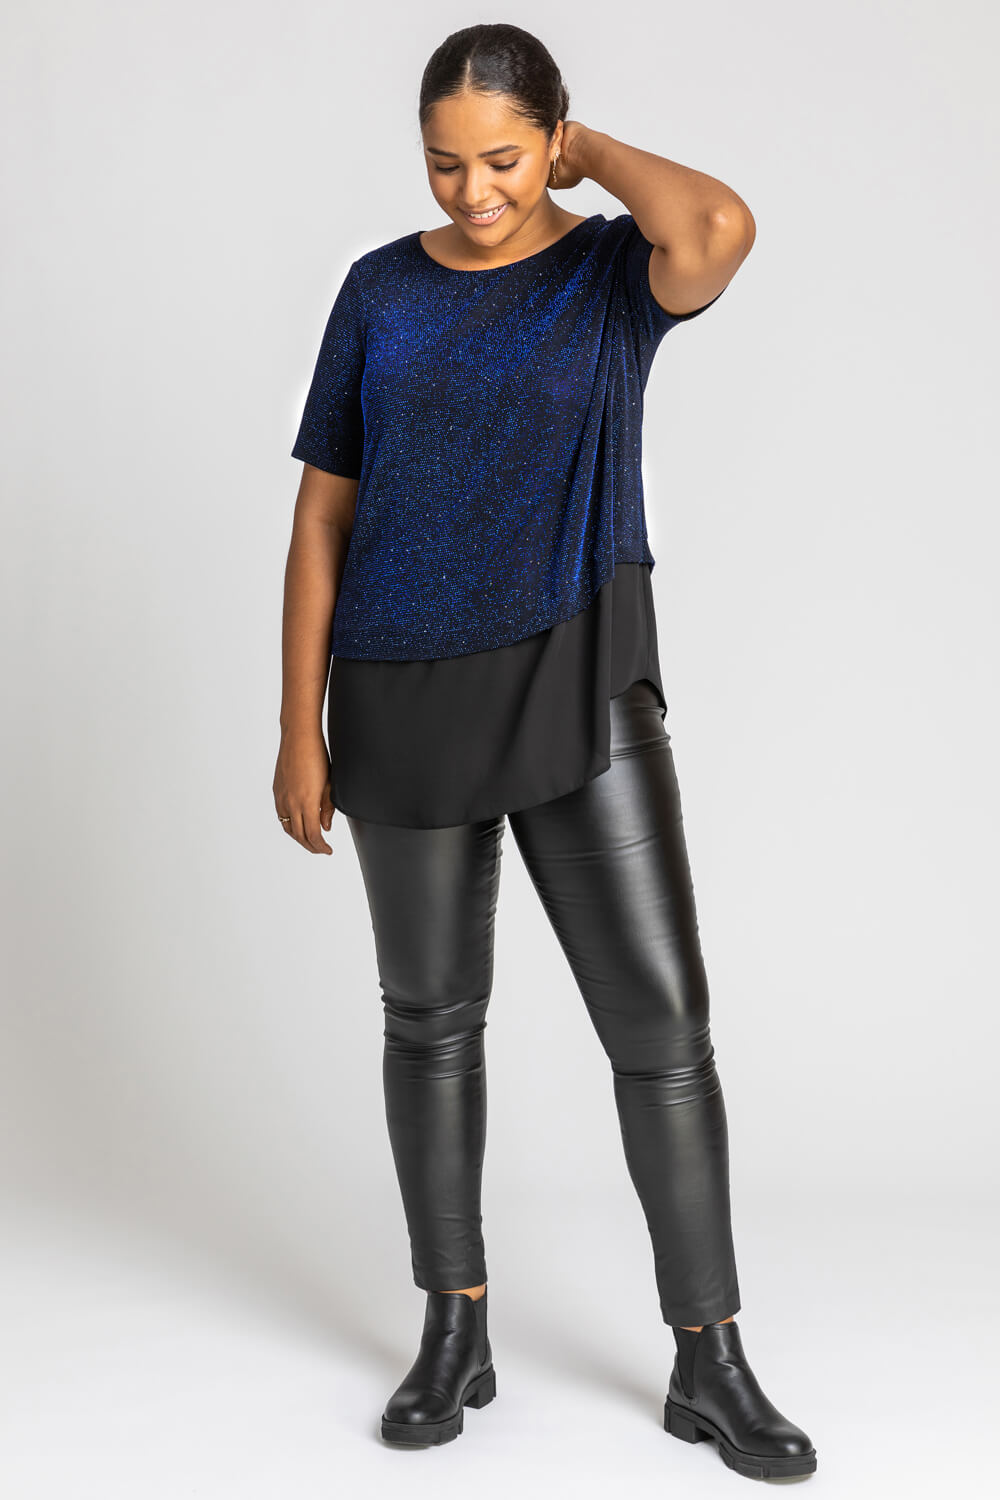 Royal Blue Curve Sparkle Overlay Top, Image 3 of 5